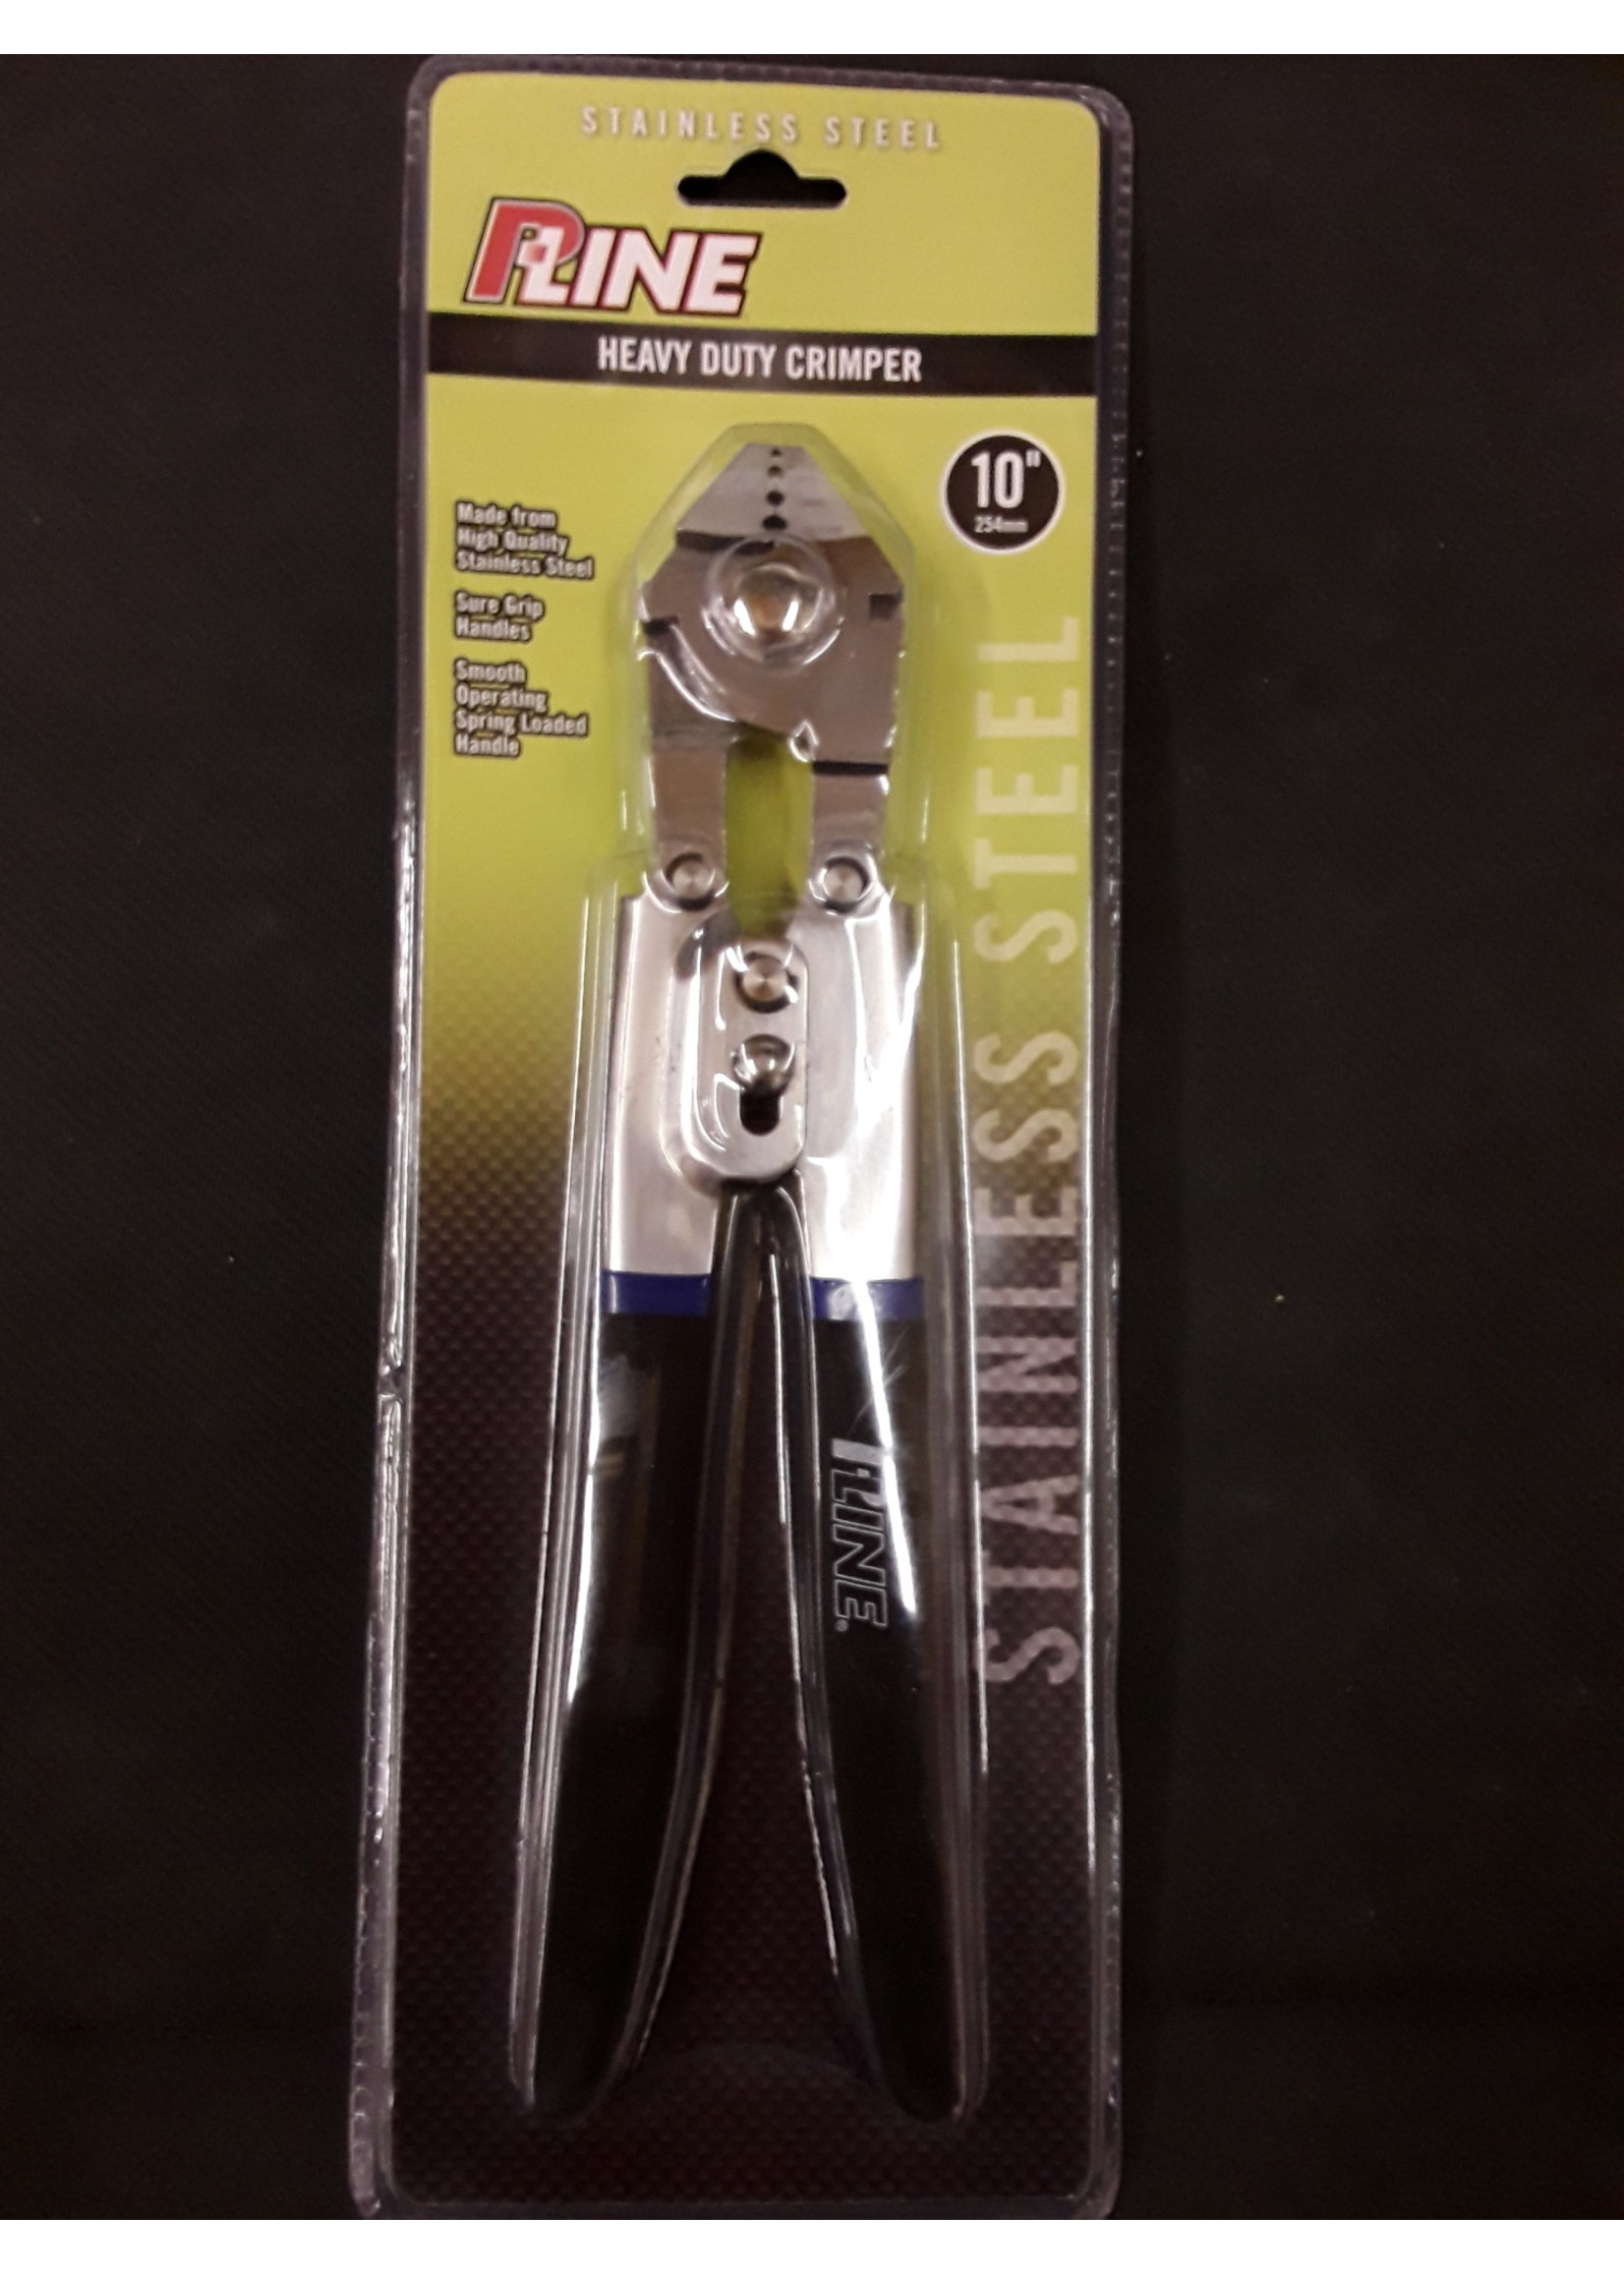 P-LINE P-Line  HEAVY DUTY HAND CRIMPER 10" STAINLESS STEEL